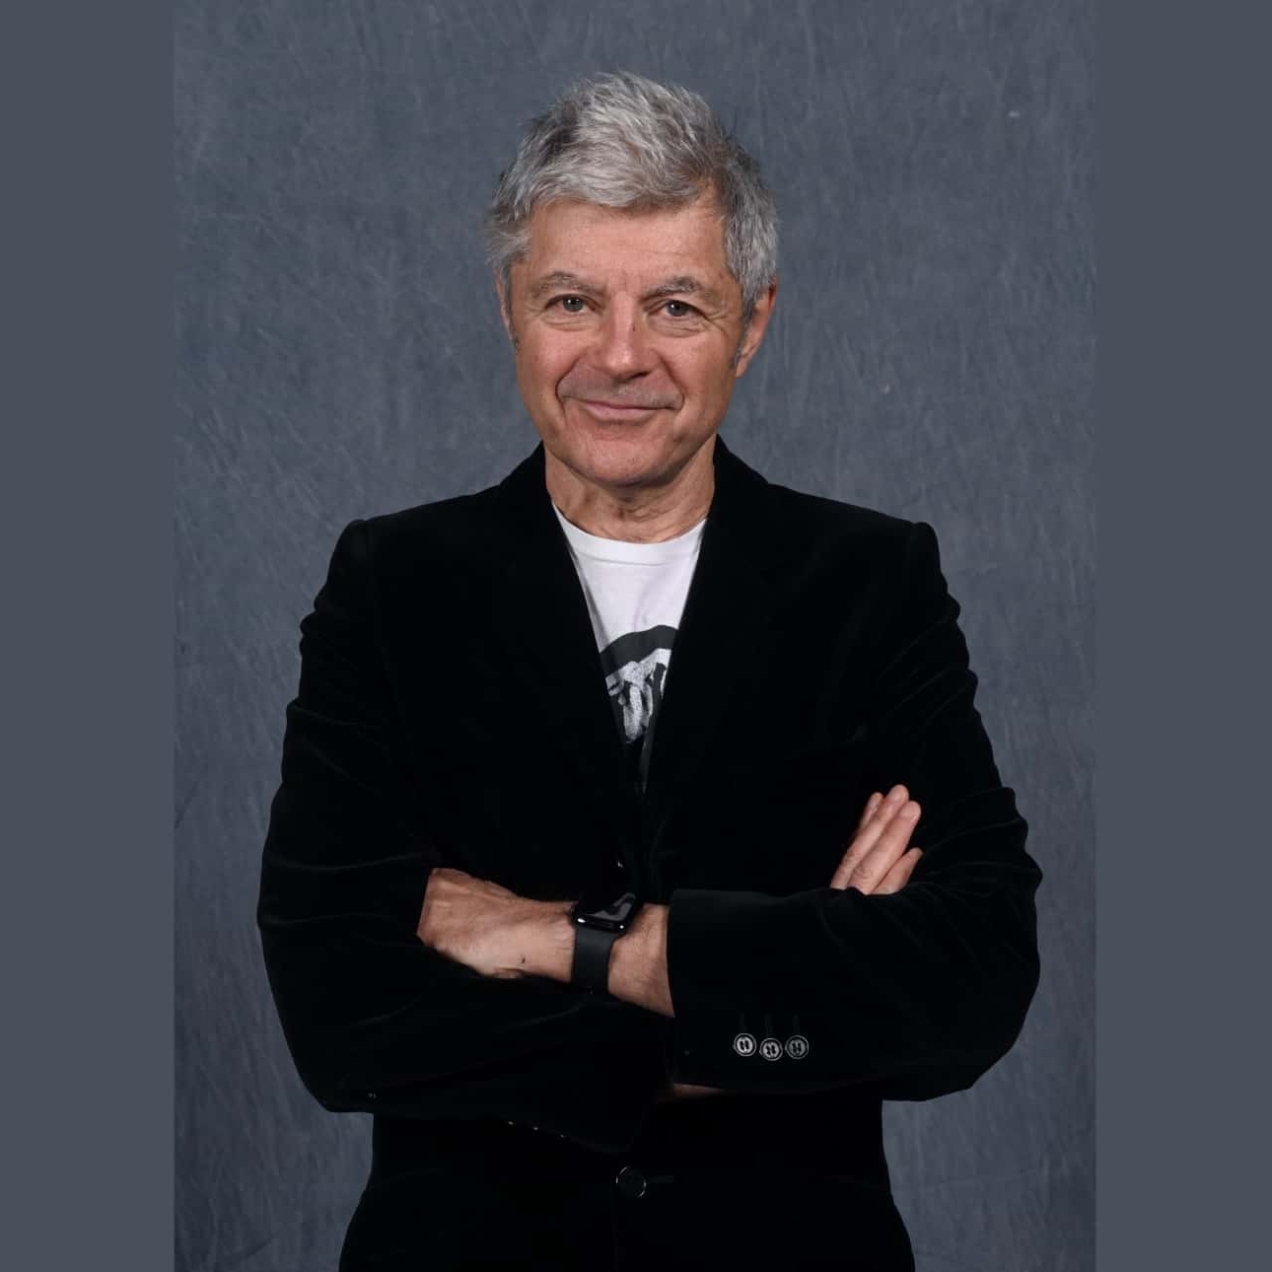 Alan Edwards, a white man with grey hair, wearing a black jacket over a white t-shirt. His arms are crossed. The background is grey